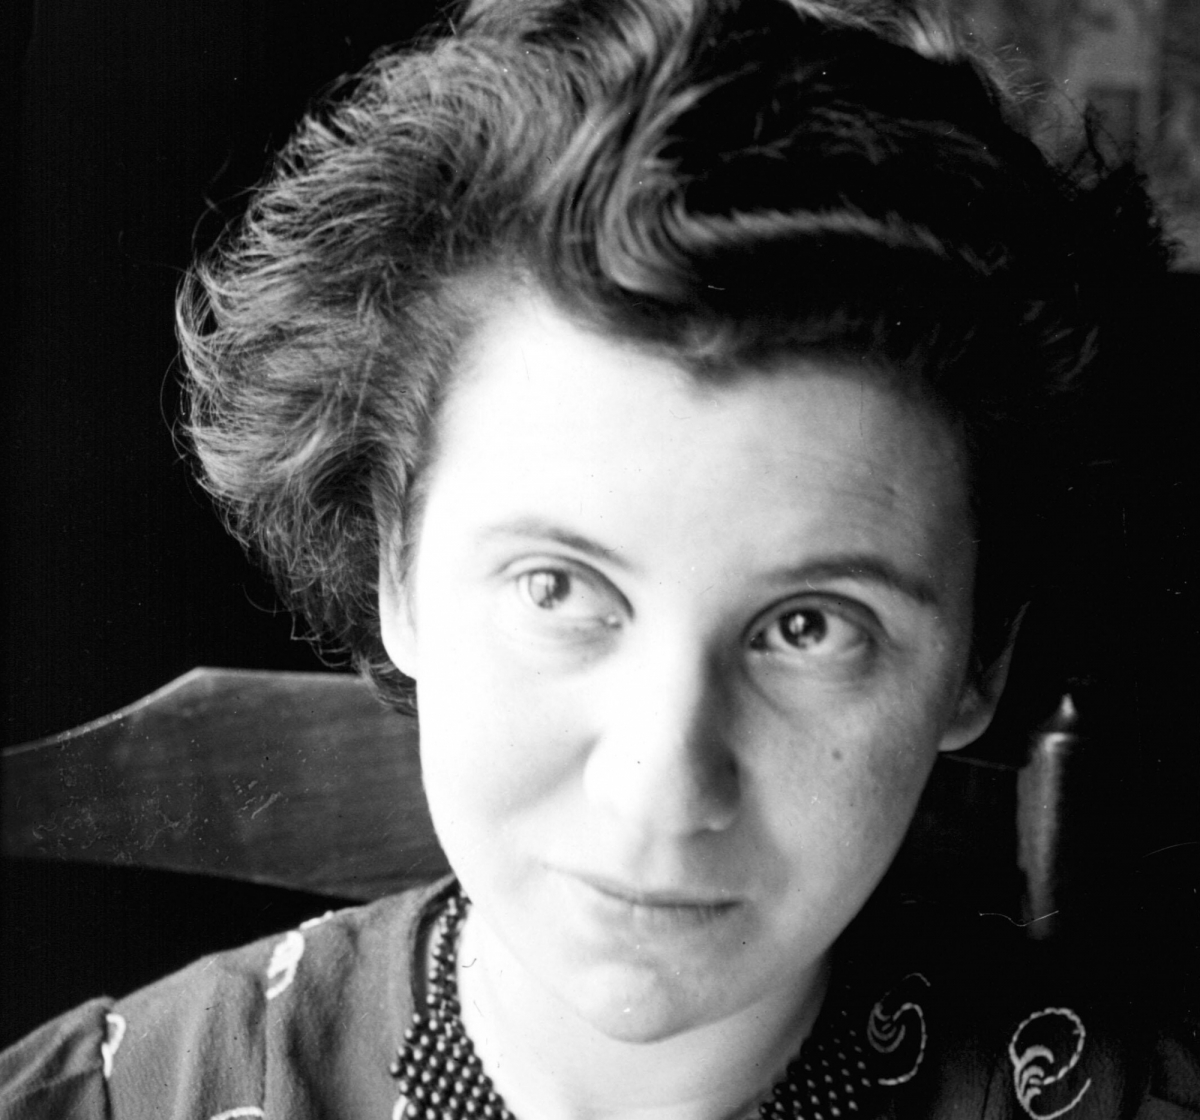 The Art of Suffering: Inspired by Etty Hillesum